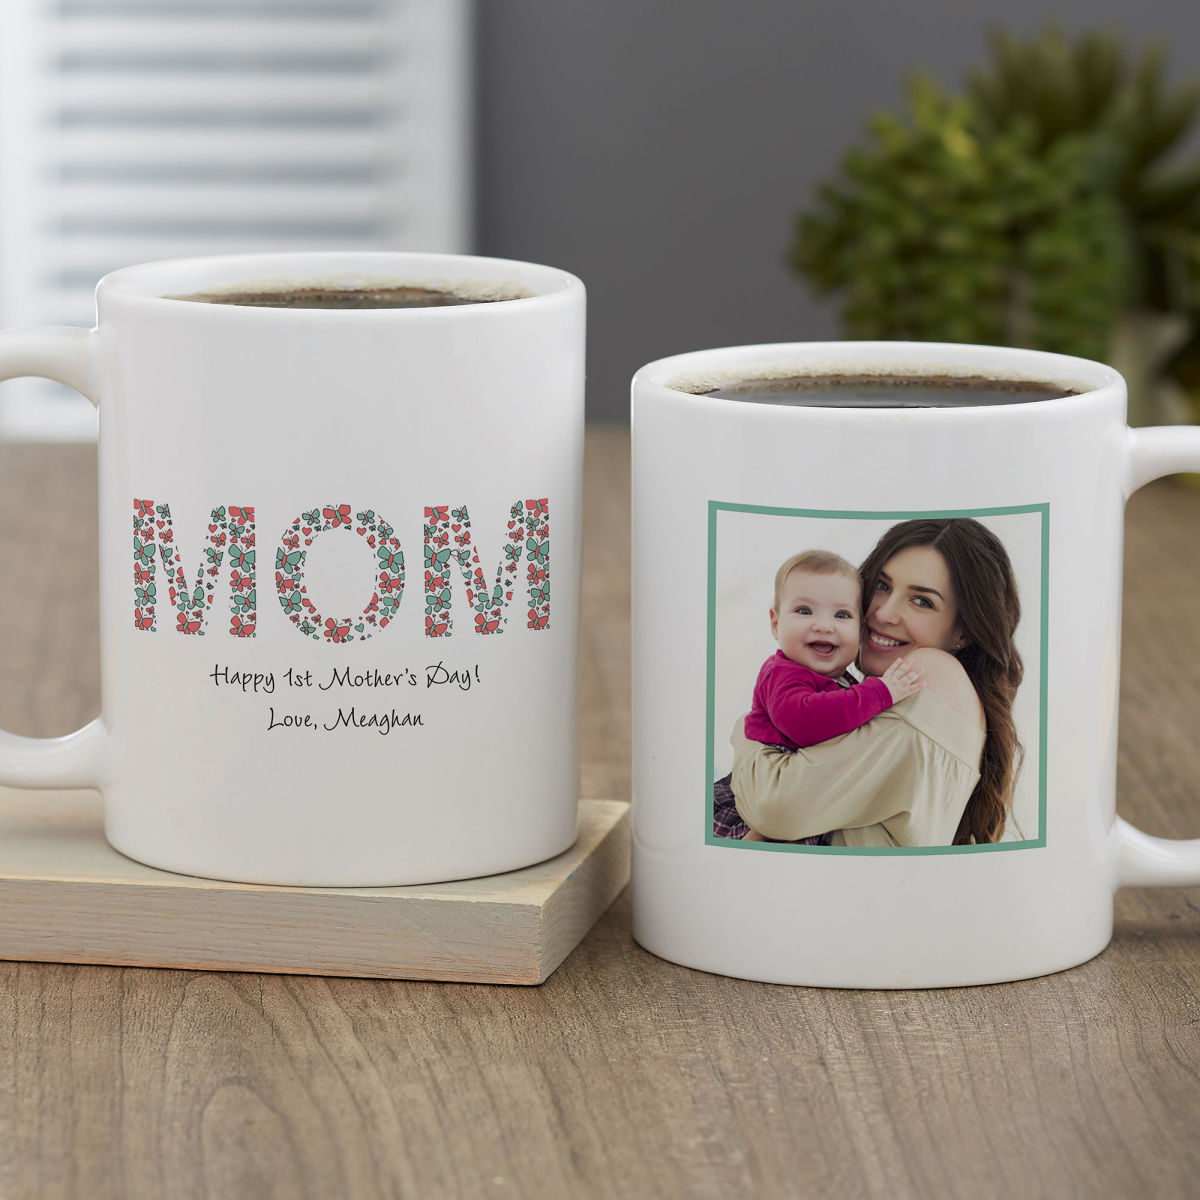 Mother's Day Photo philoSophie's Personalized Coffee Mug